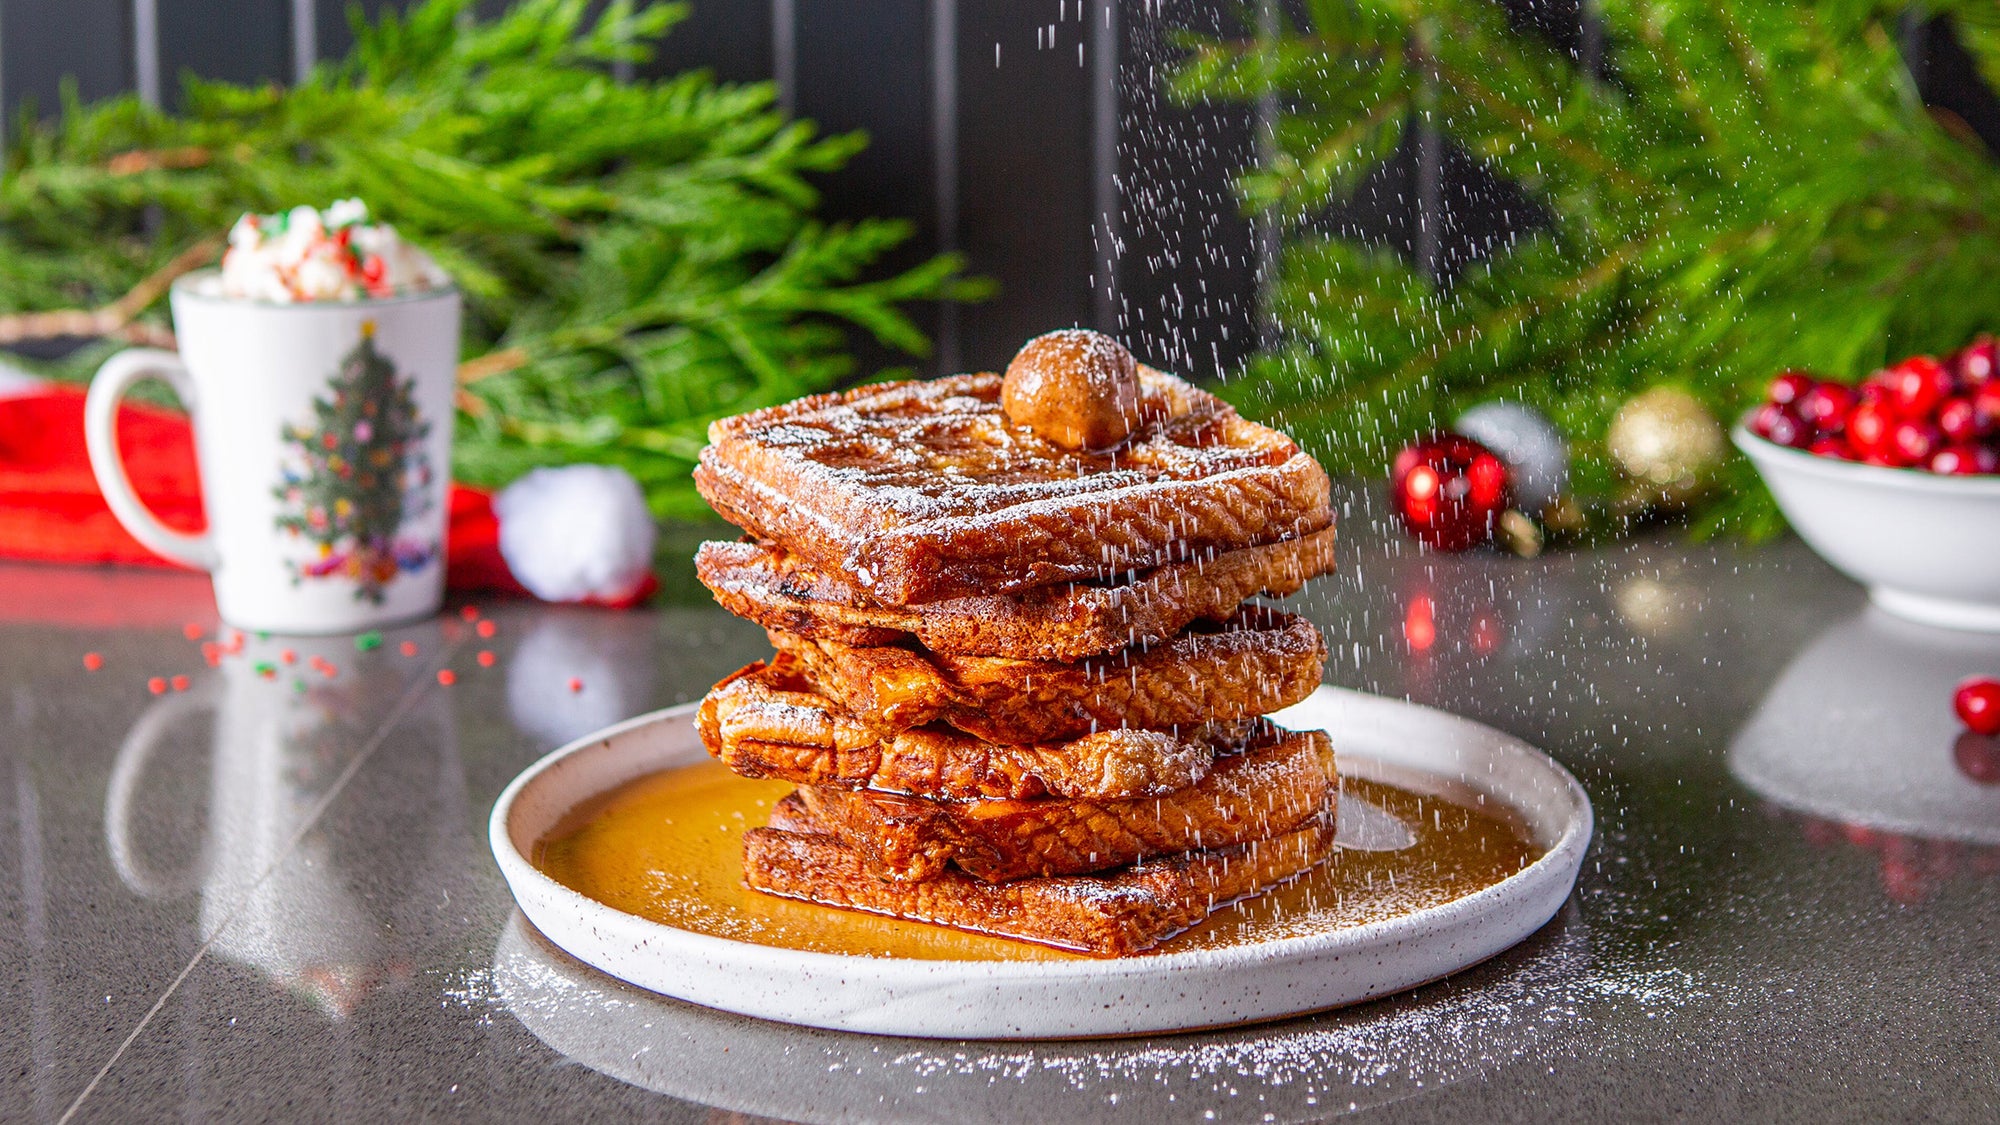 French Toast Waffles topped with Epicurean Butter Cinnamon & Brown Sugar Flavored butter